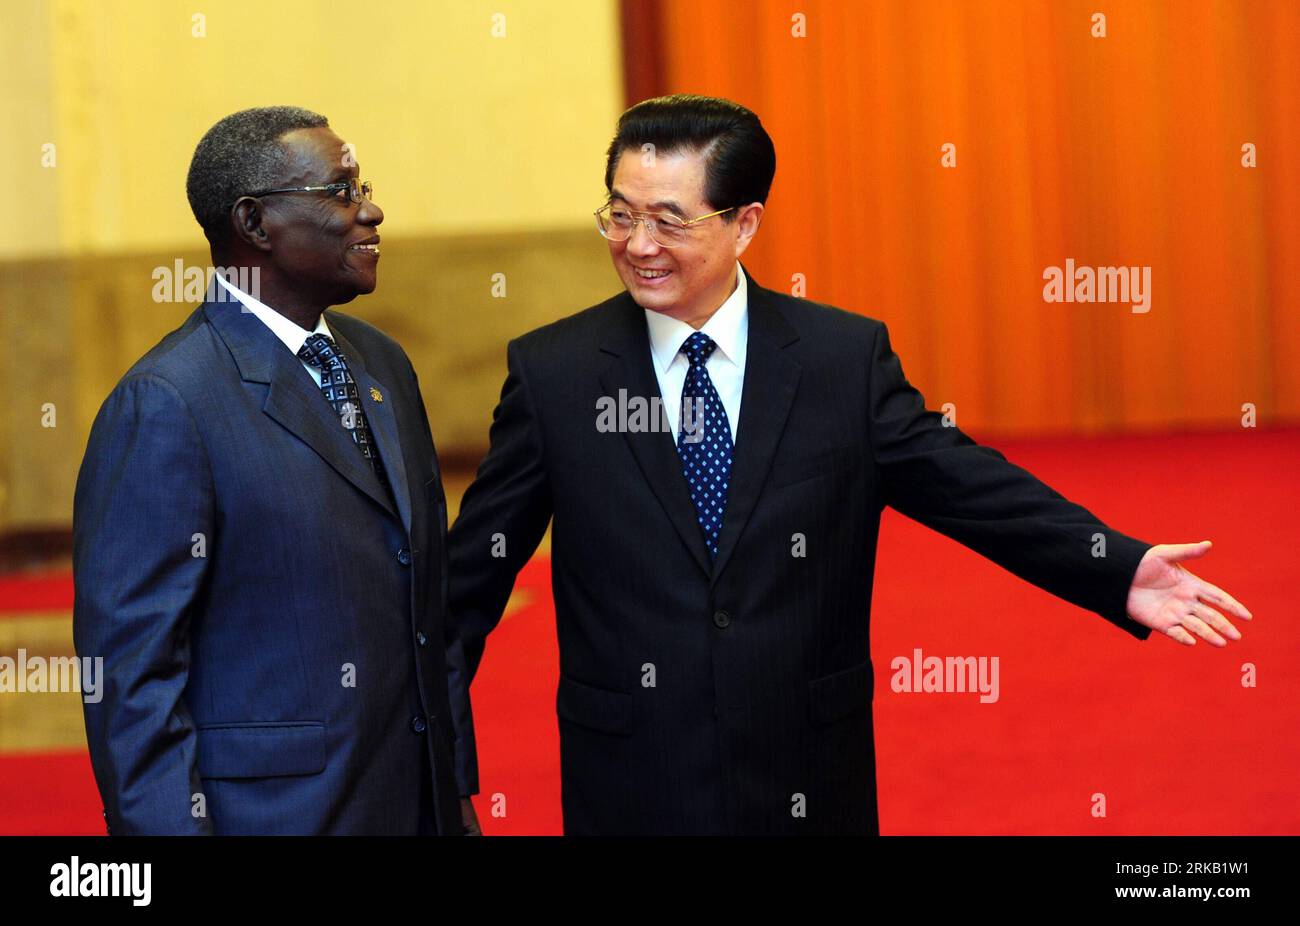 Bildnummer: 54445141  Datum: 20.09.2010  Copyright: imago/Xinhua (100920) -- BEIJING, Sept. 20, 2010 (Xinhua) -- Chinese President Hu Jintao (R) holds a welcoming ceremony for his Ghanaian counterpart John Evans Atta Mills at the Great Hall of the in Beijing, capital of China, Sept. 20, 2010. (Xinhua/Zhang Duo) CHINA-GHANA-PRESIDENTS-WELCOMING CEREMONY (CN) PUBLICATIONxNOTxINxCHN People Politik kbdig xdp 2010 quer premiumd xint     Bildnummer 54445141 Date 20 09 2010 Copyright Imago XINHUA  Beijing Sept 20 2010 XINHUA Chinese President HU Jintao r holds a Welcoming Ceremony for His Ghanaian Pa Stock Photo